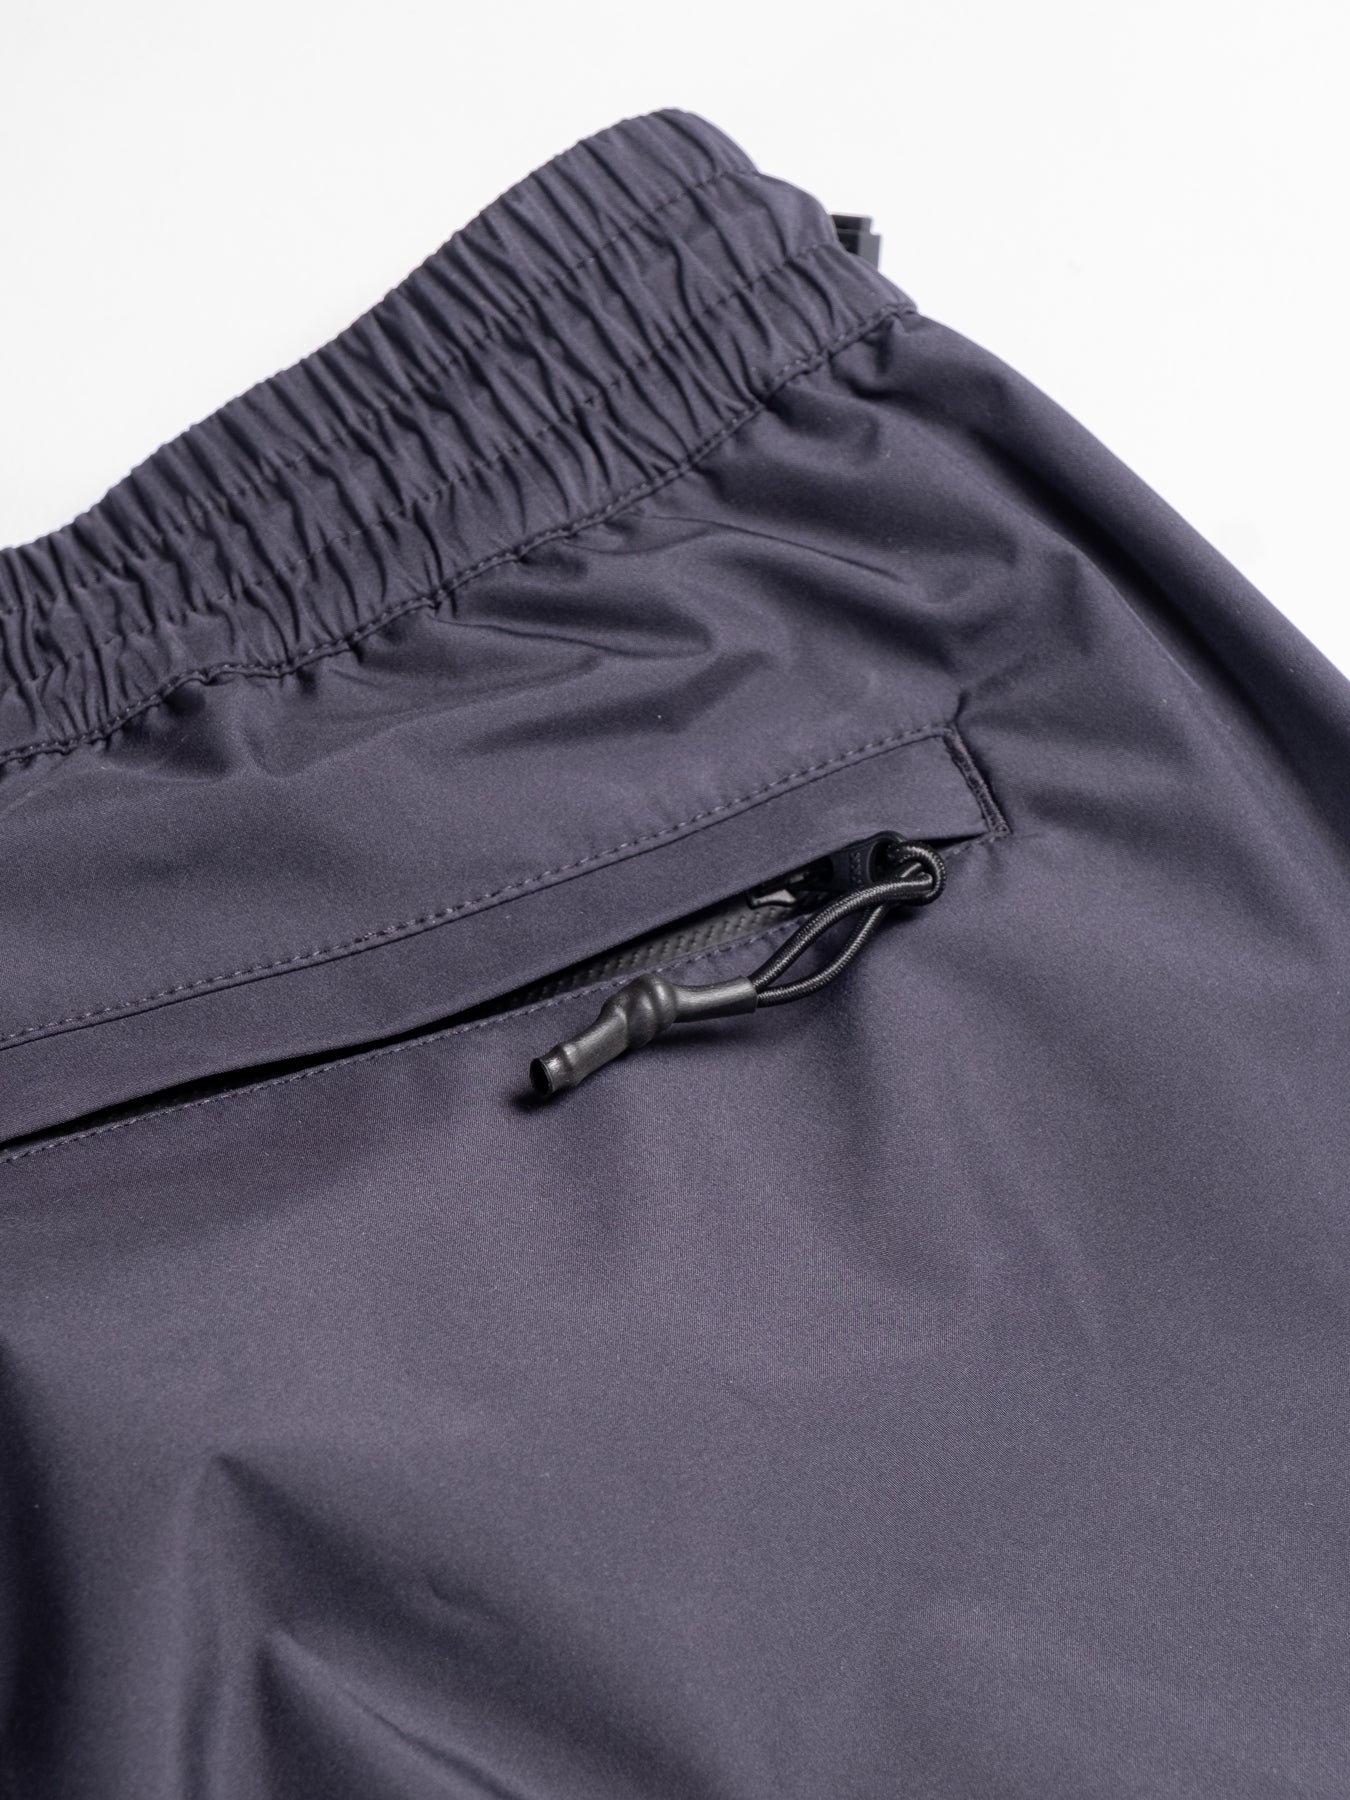 Convertible Hiking Pant in Navy